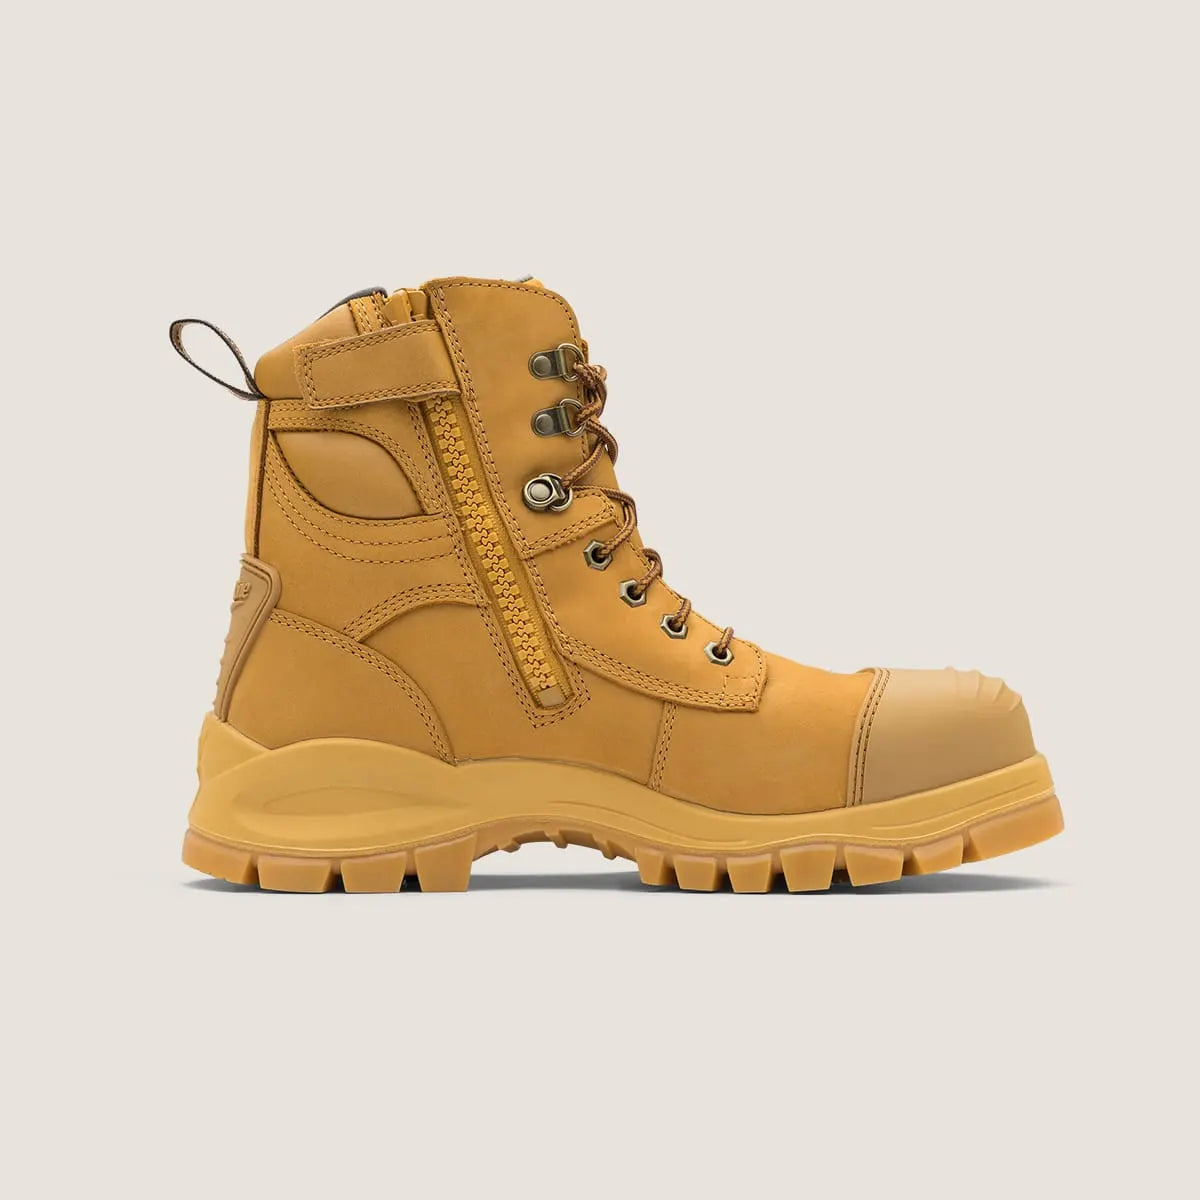 Blundstone 992 Unisex Zip Up Series Safety Boots-Wheat